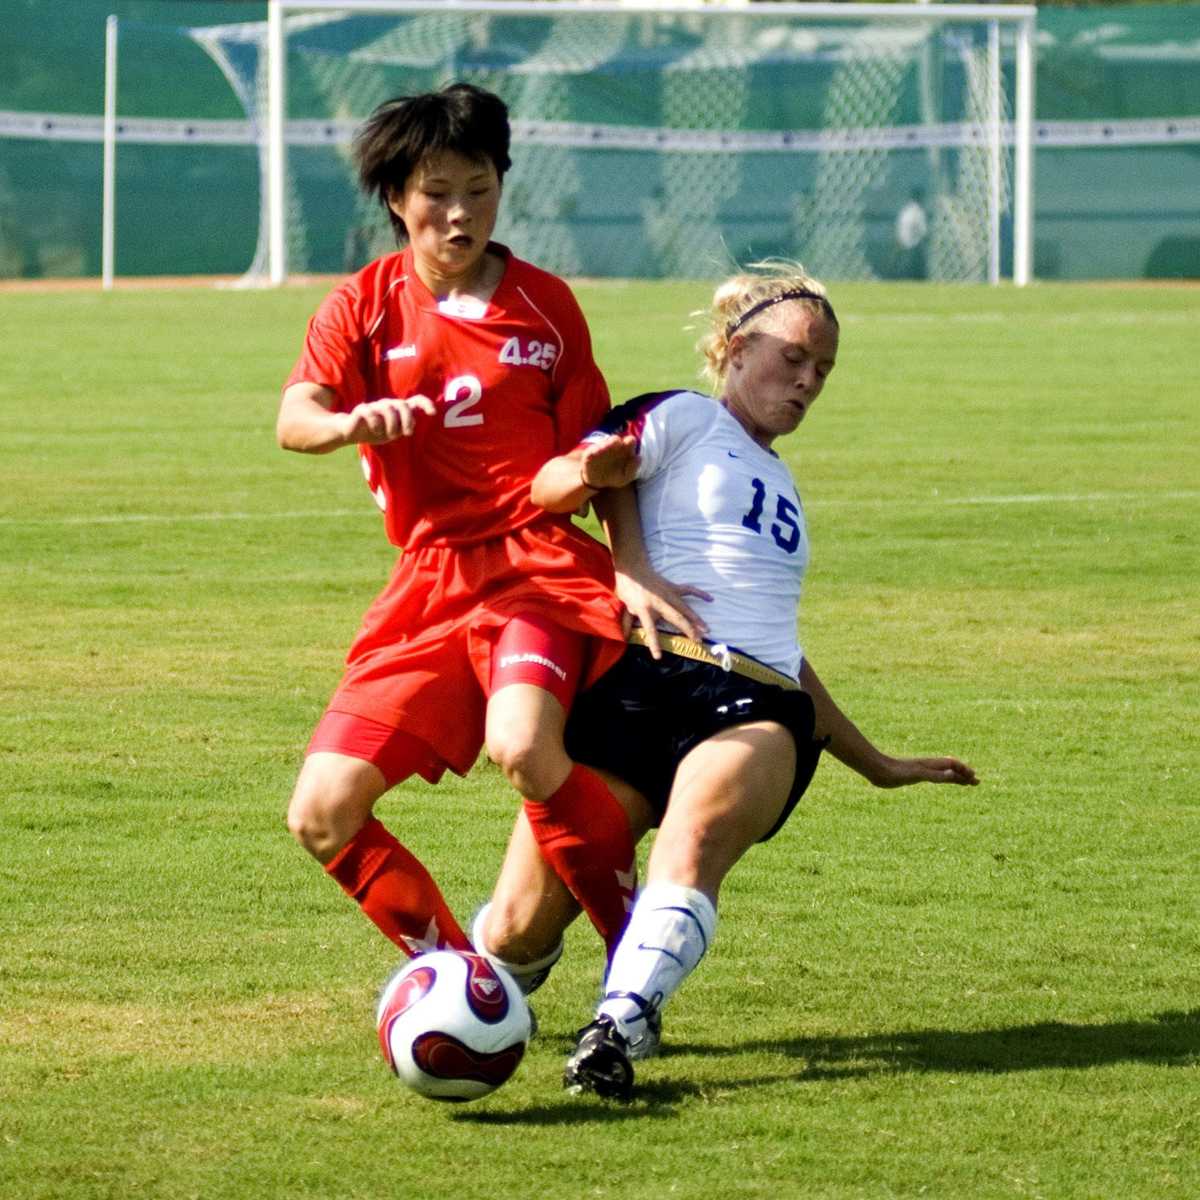 A football player tackling an opponent from
behind